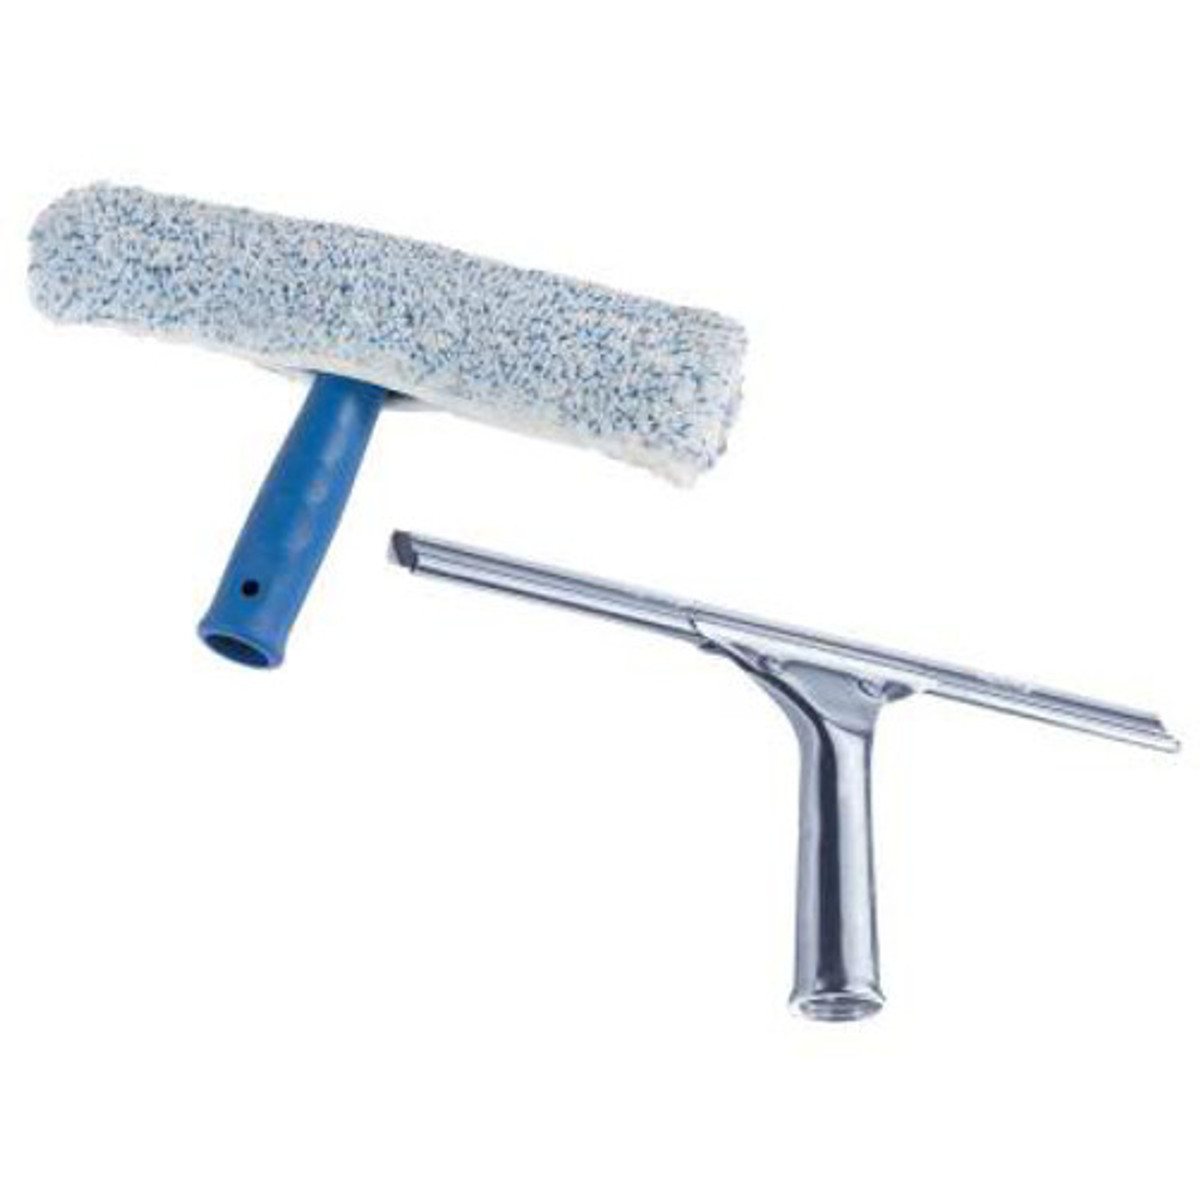 Professional Window Cleaning Kit - Includes 12 Scrubber And 12 Squeegee -  Greschlers Hardware